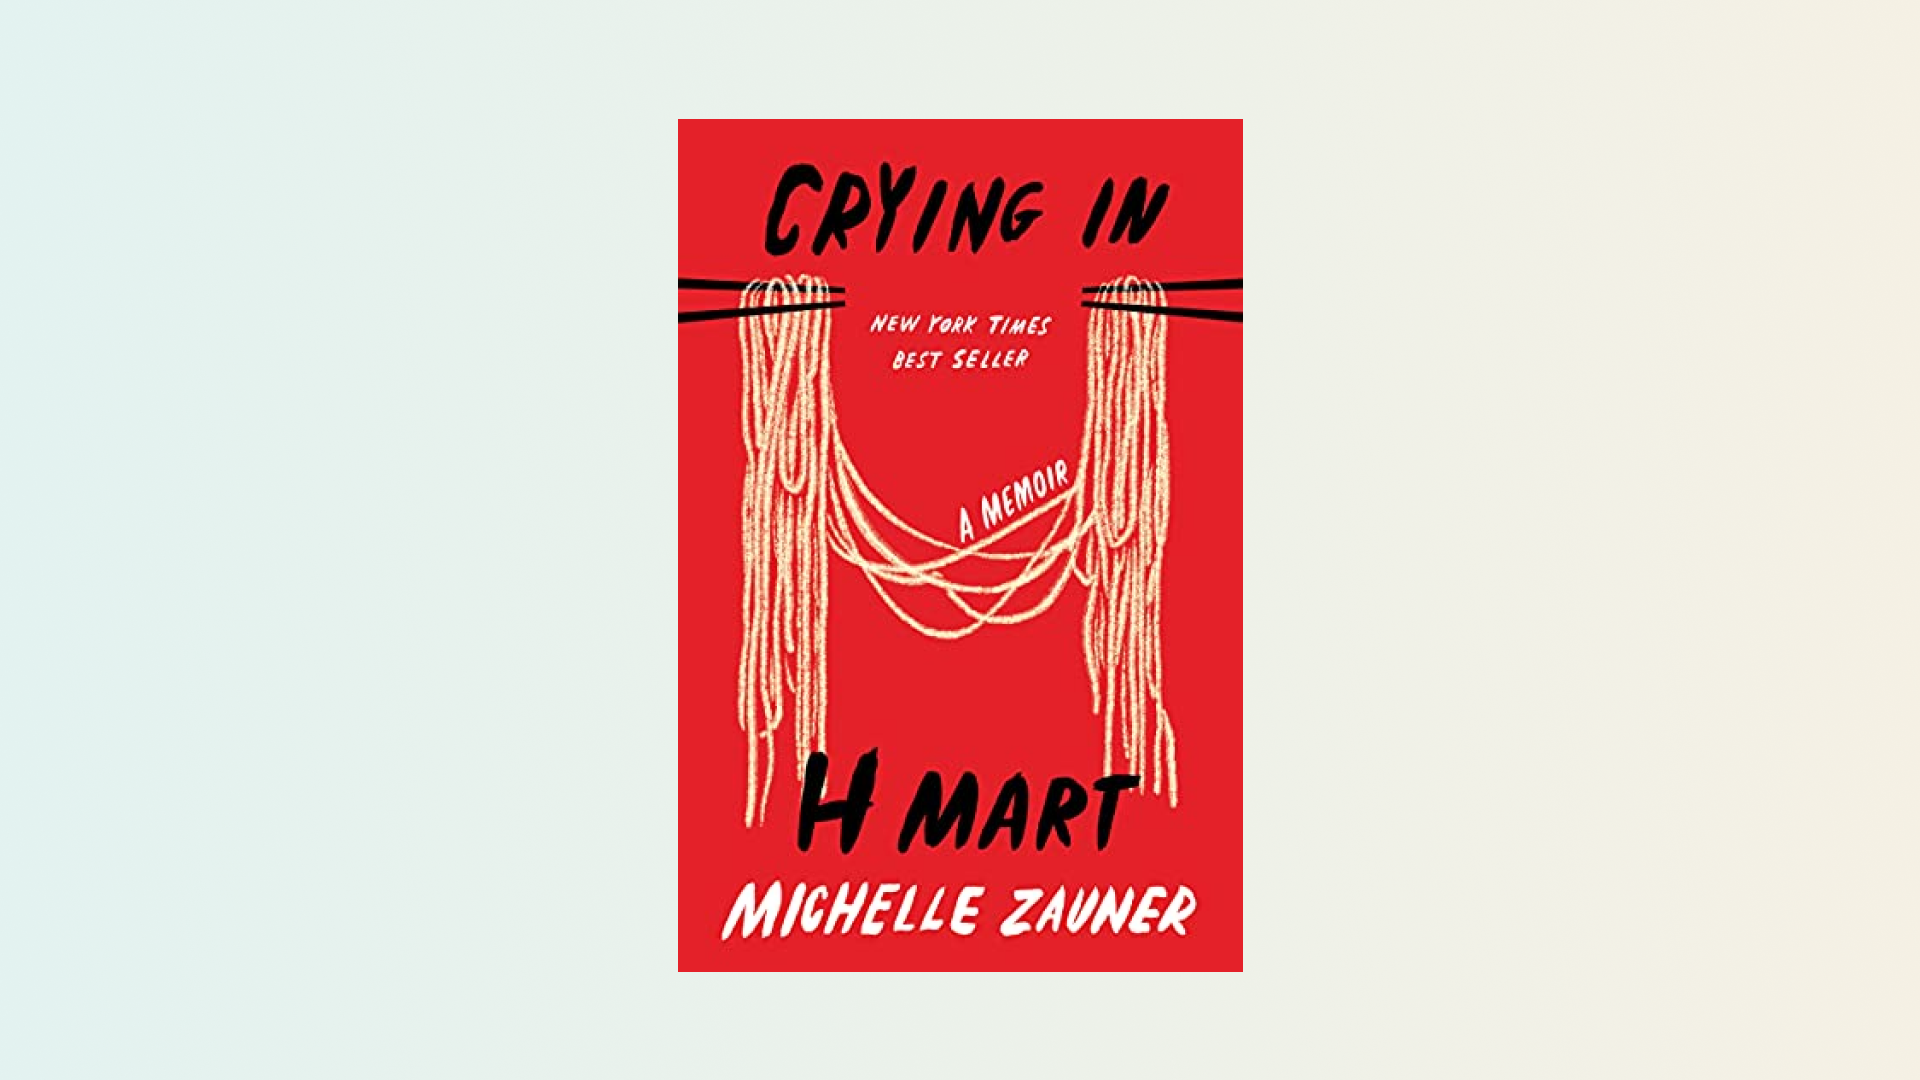 “Crying in H Mart” by Michelle Zauner